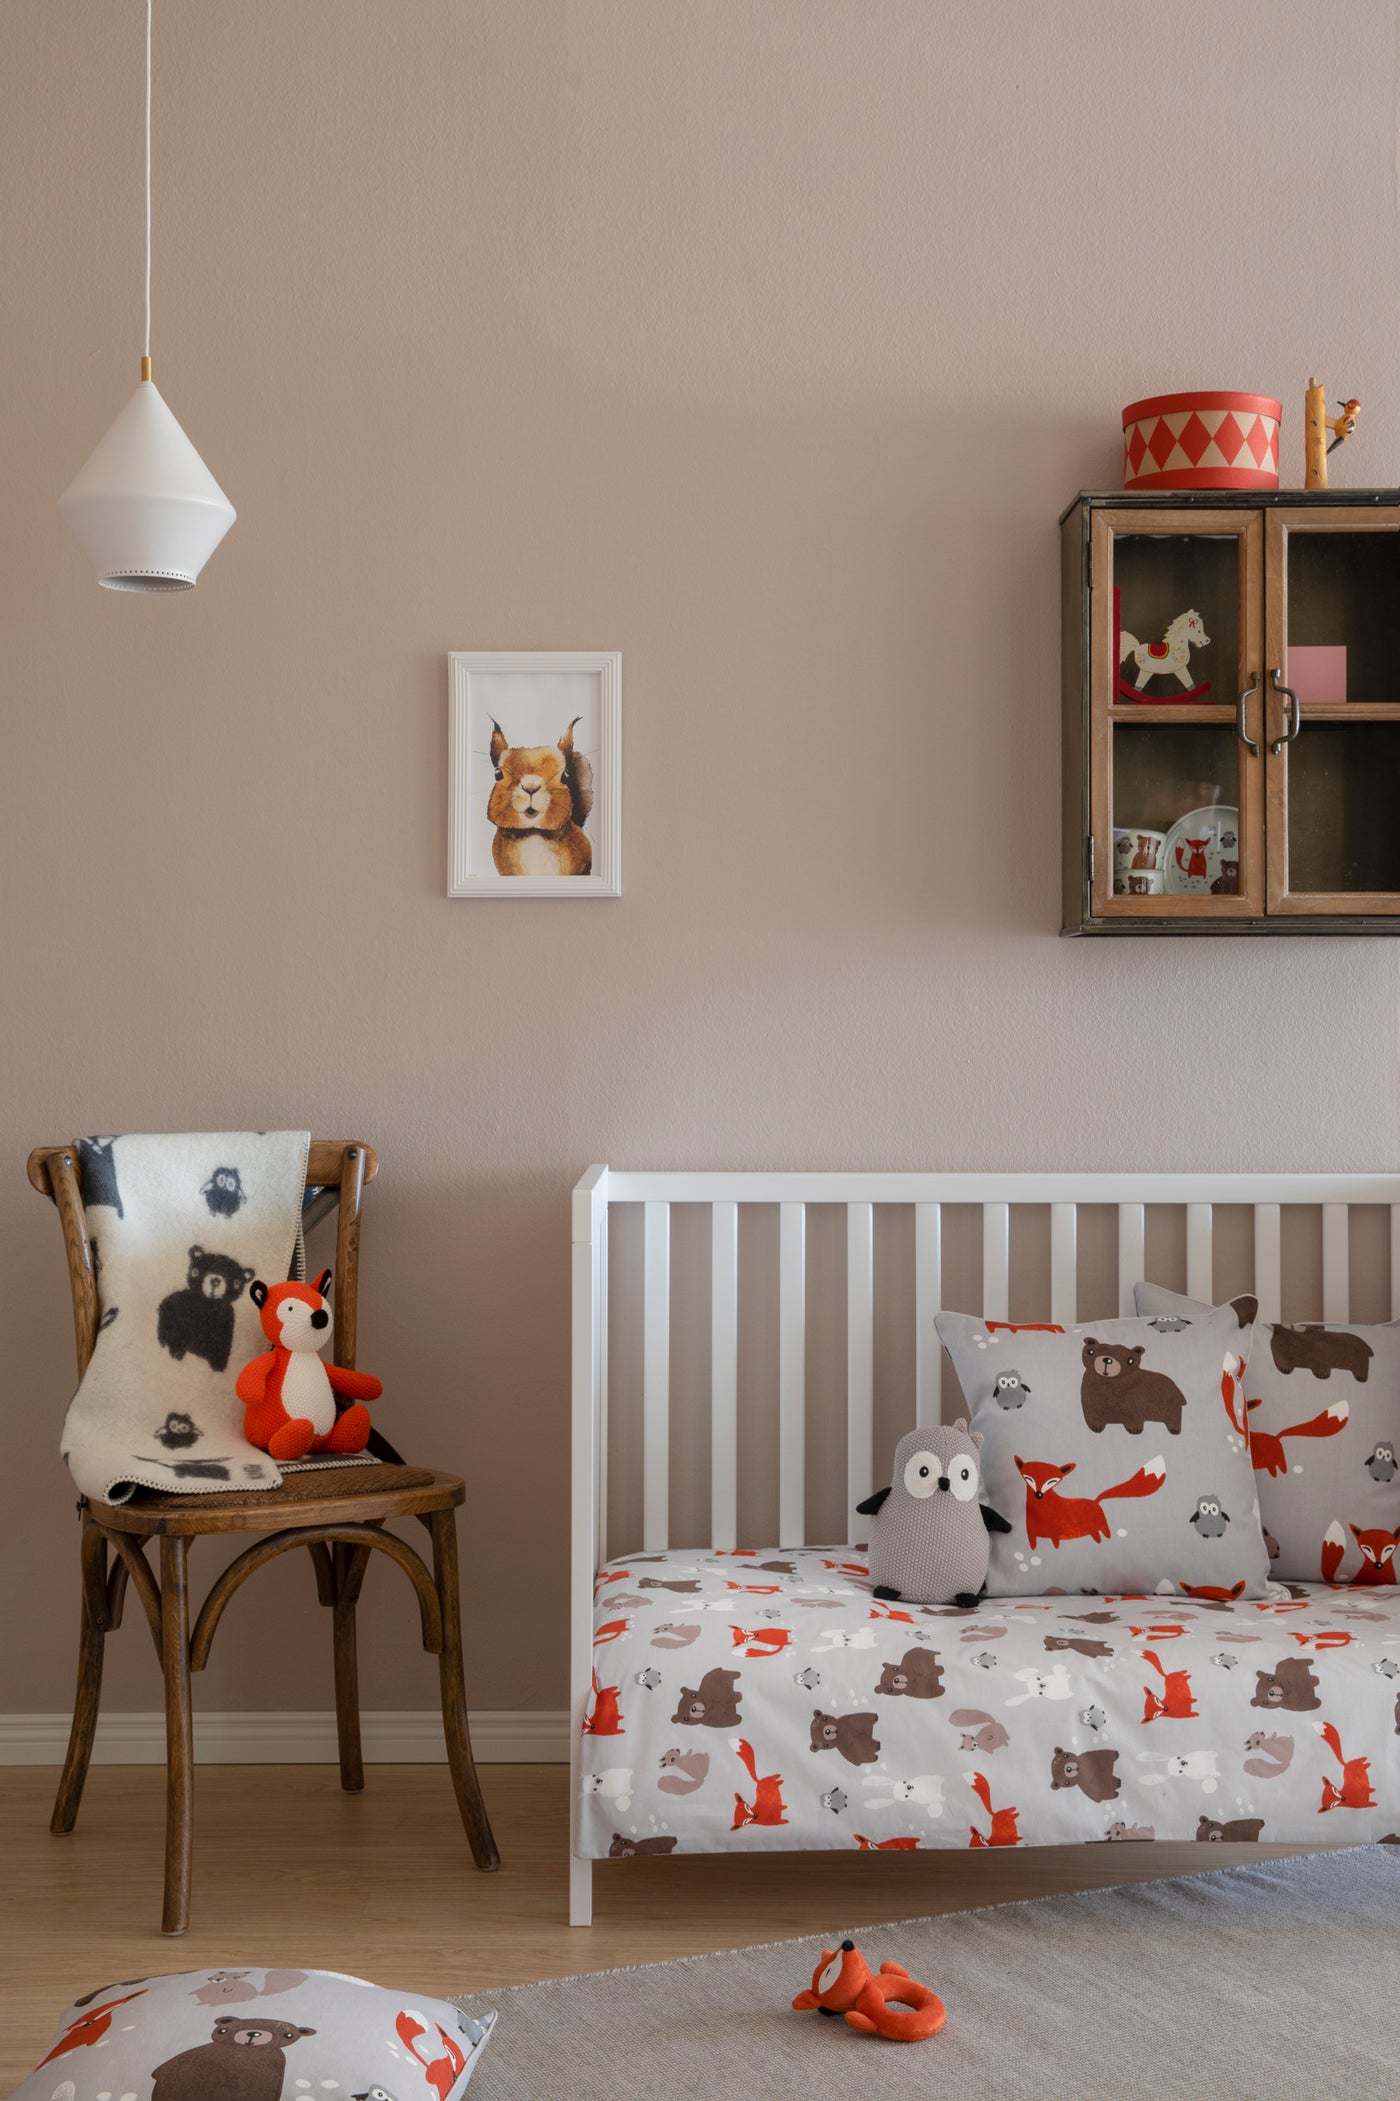 Shop The Look: Playtime with cute forest animals